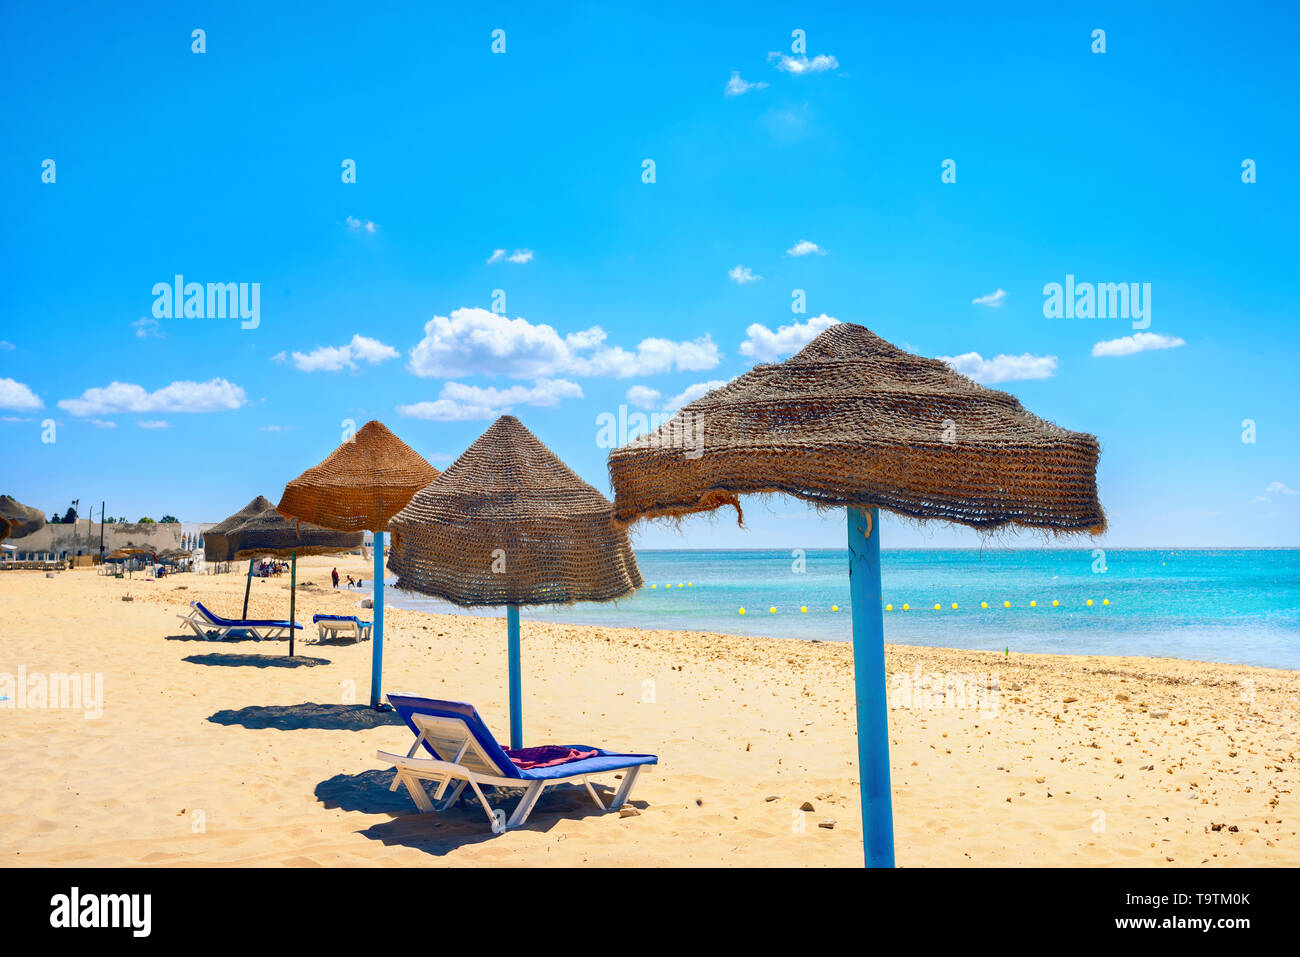 Landscape with sunshades on beach in resort town Nabeul. Tunisia, North Africa Stock Photo